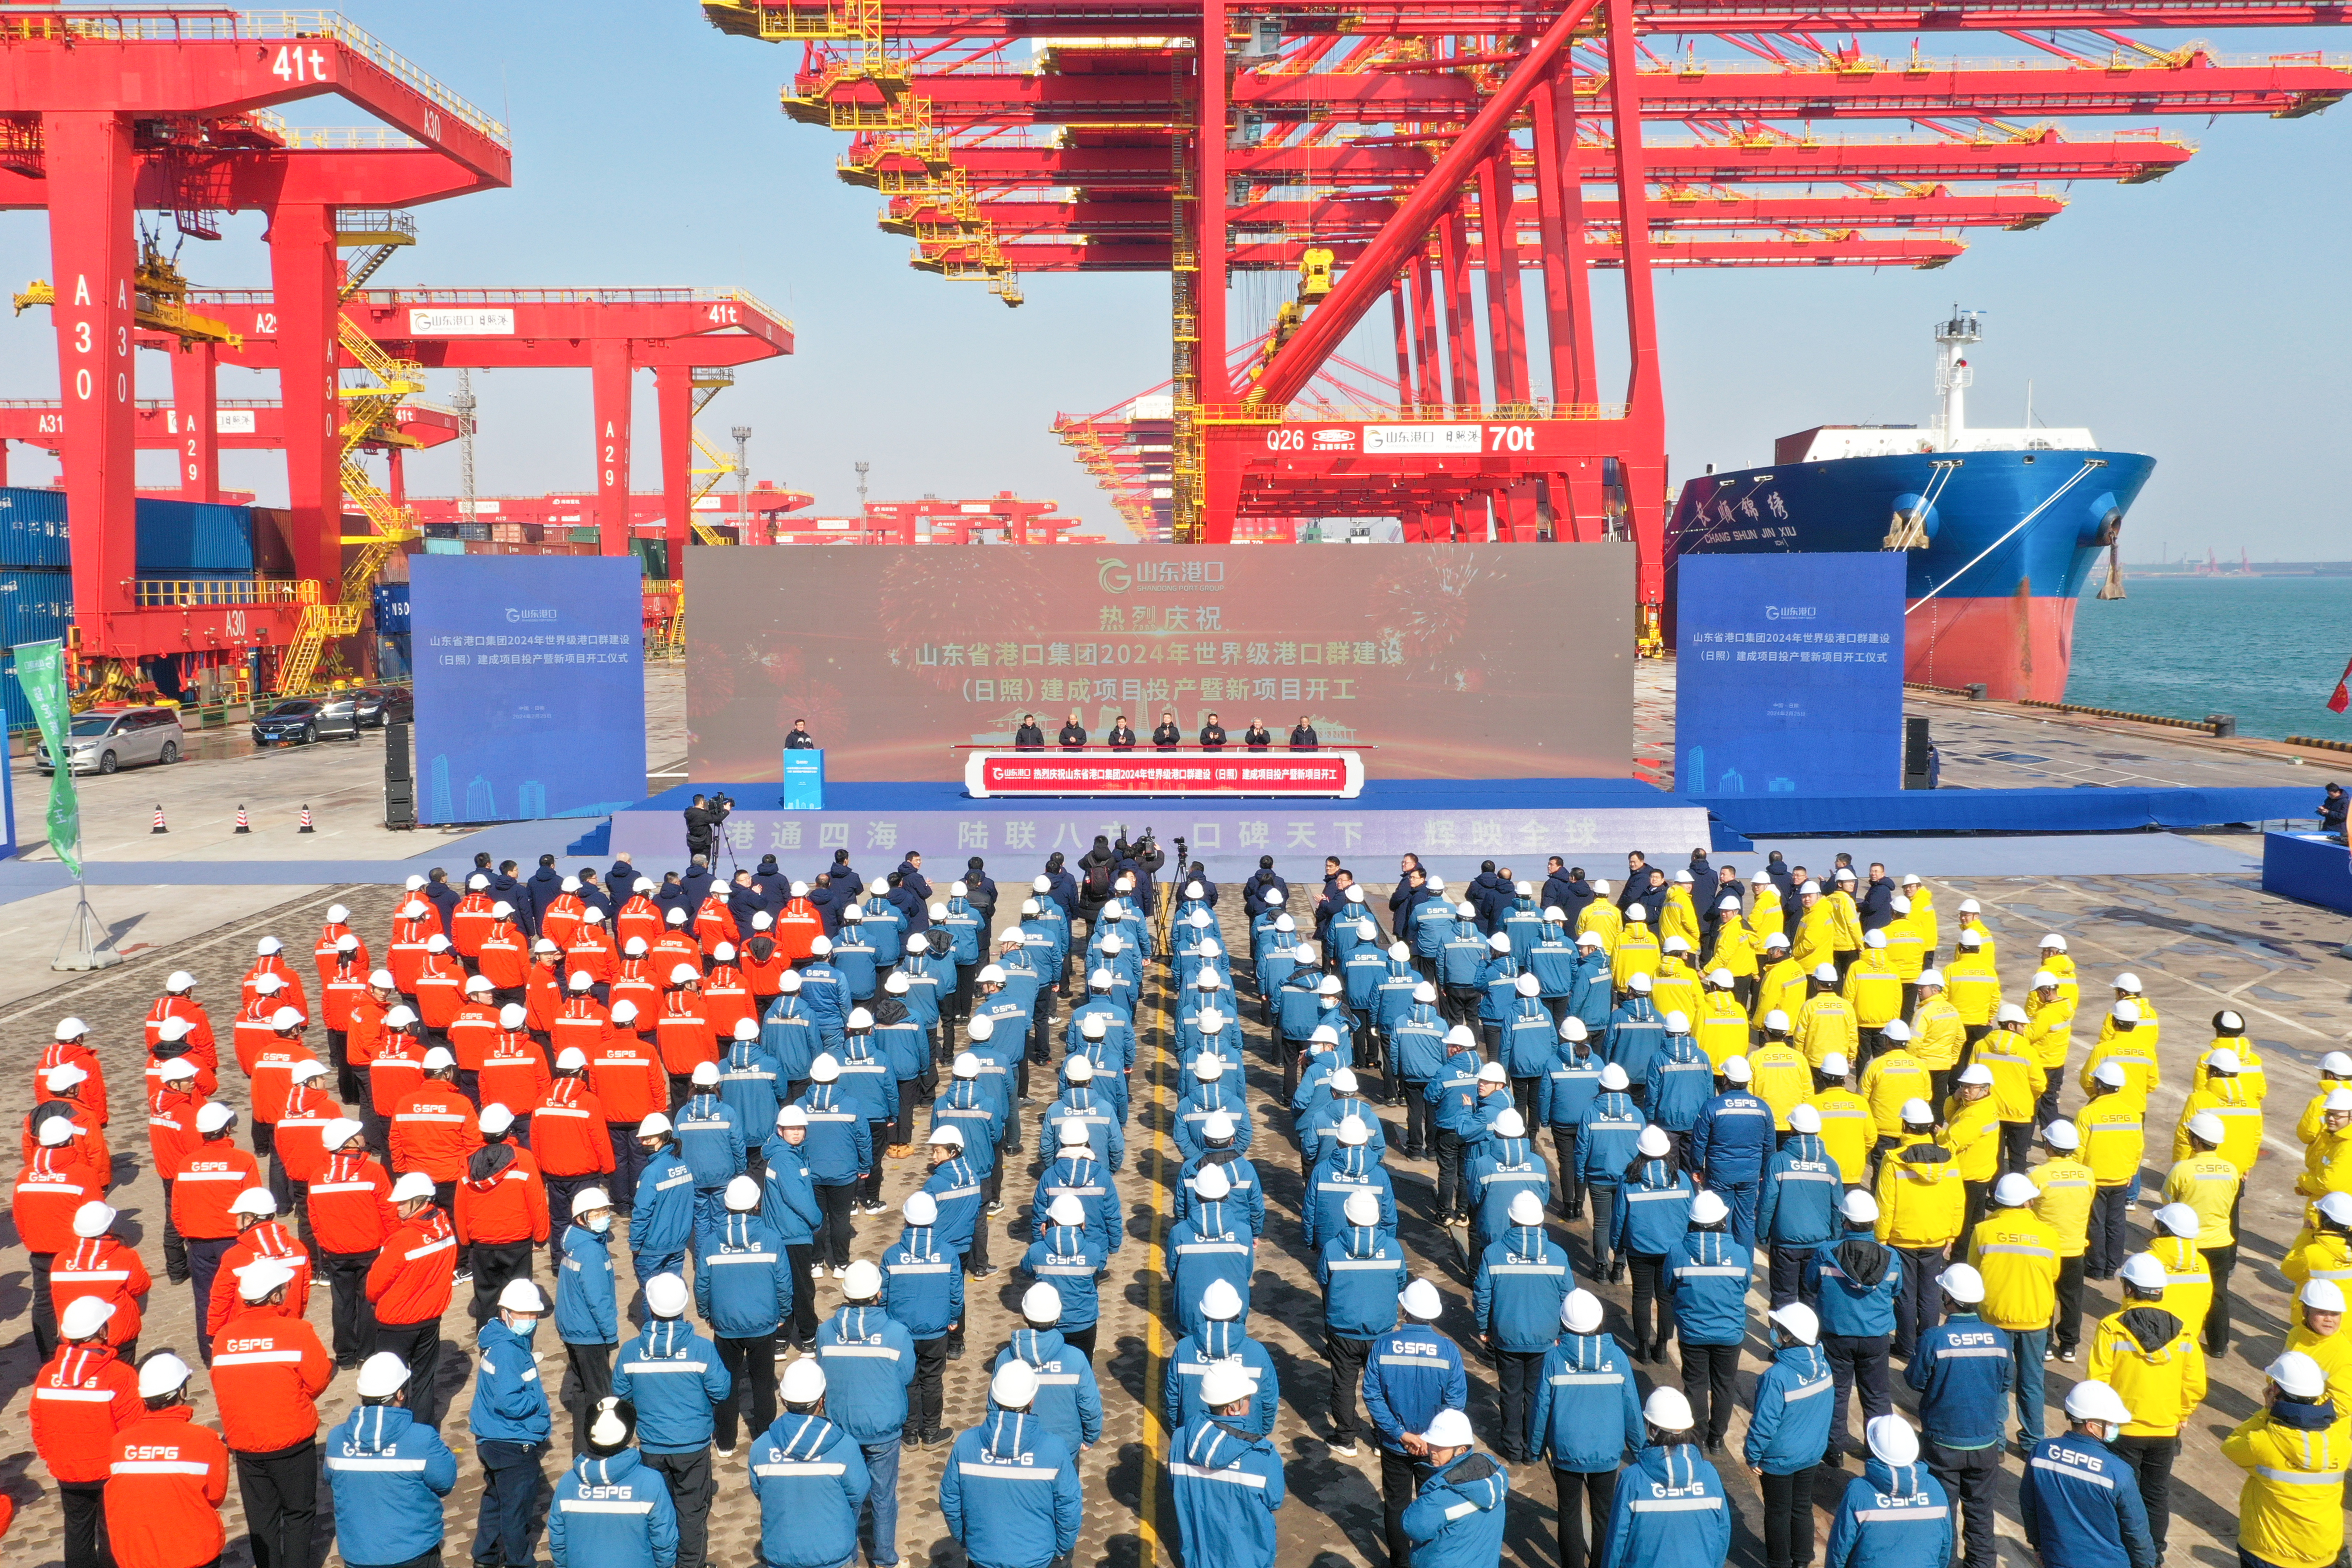 Shandong Port Group marks advancements in building world-class port cluster